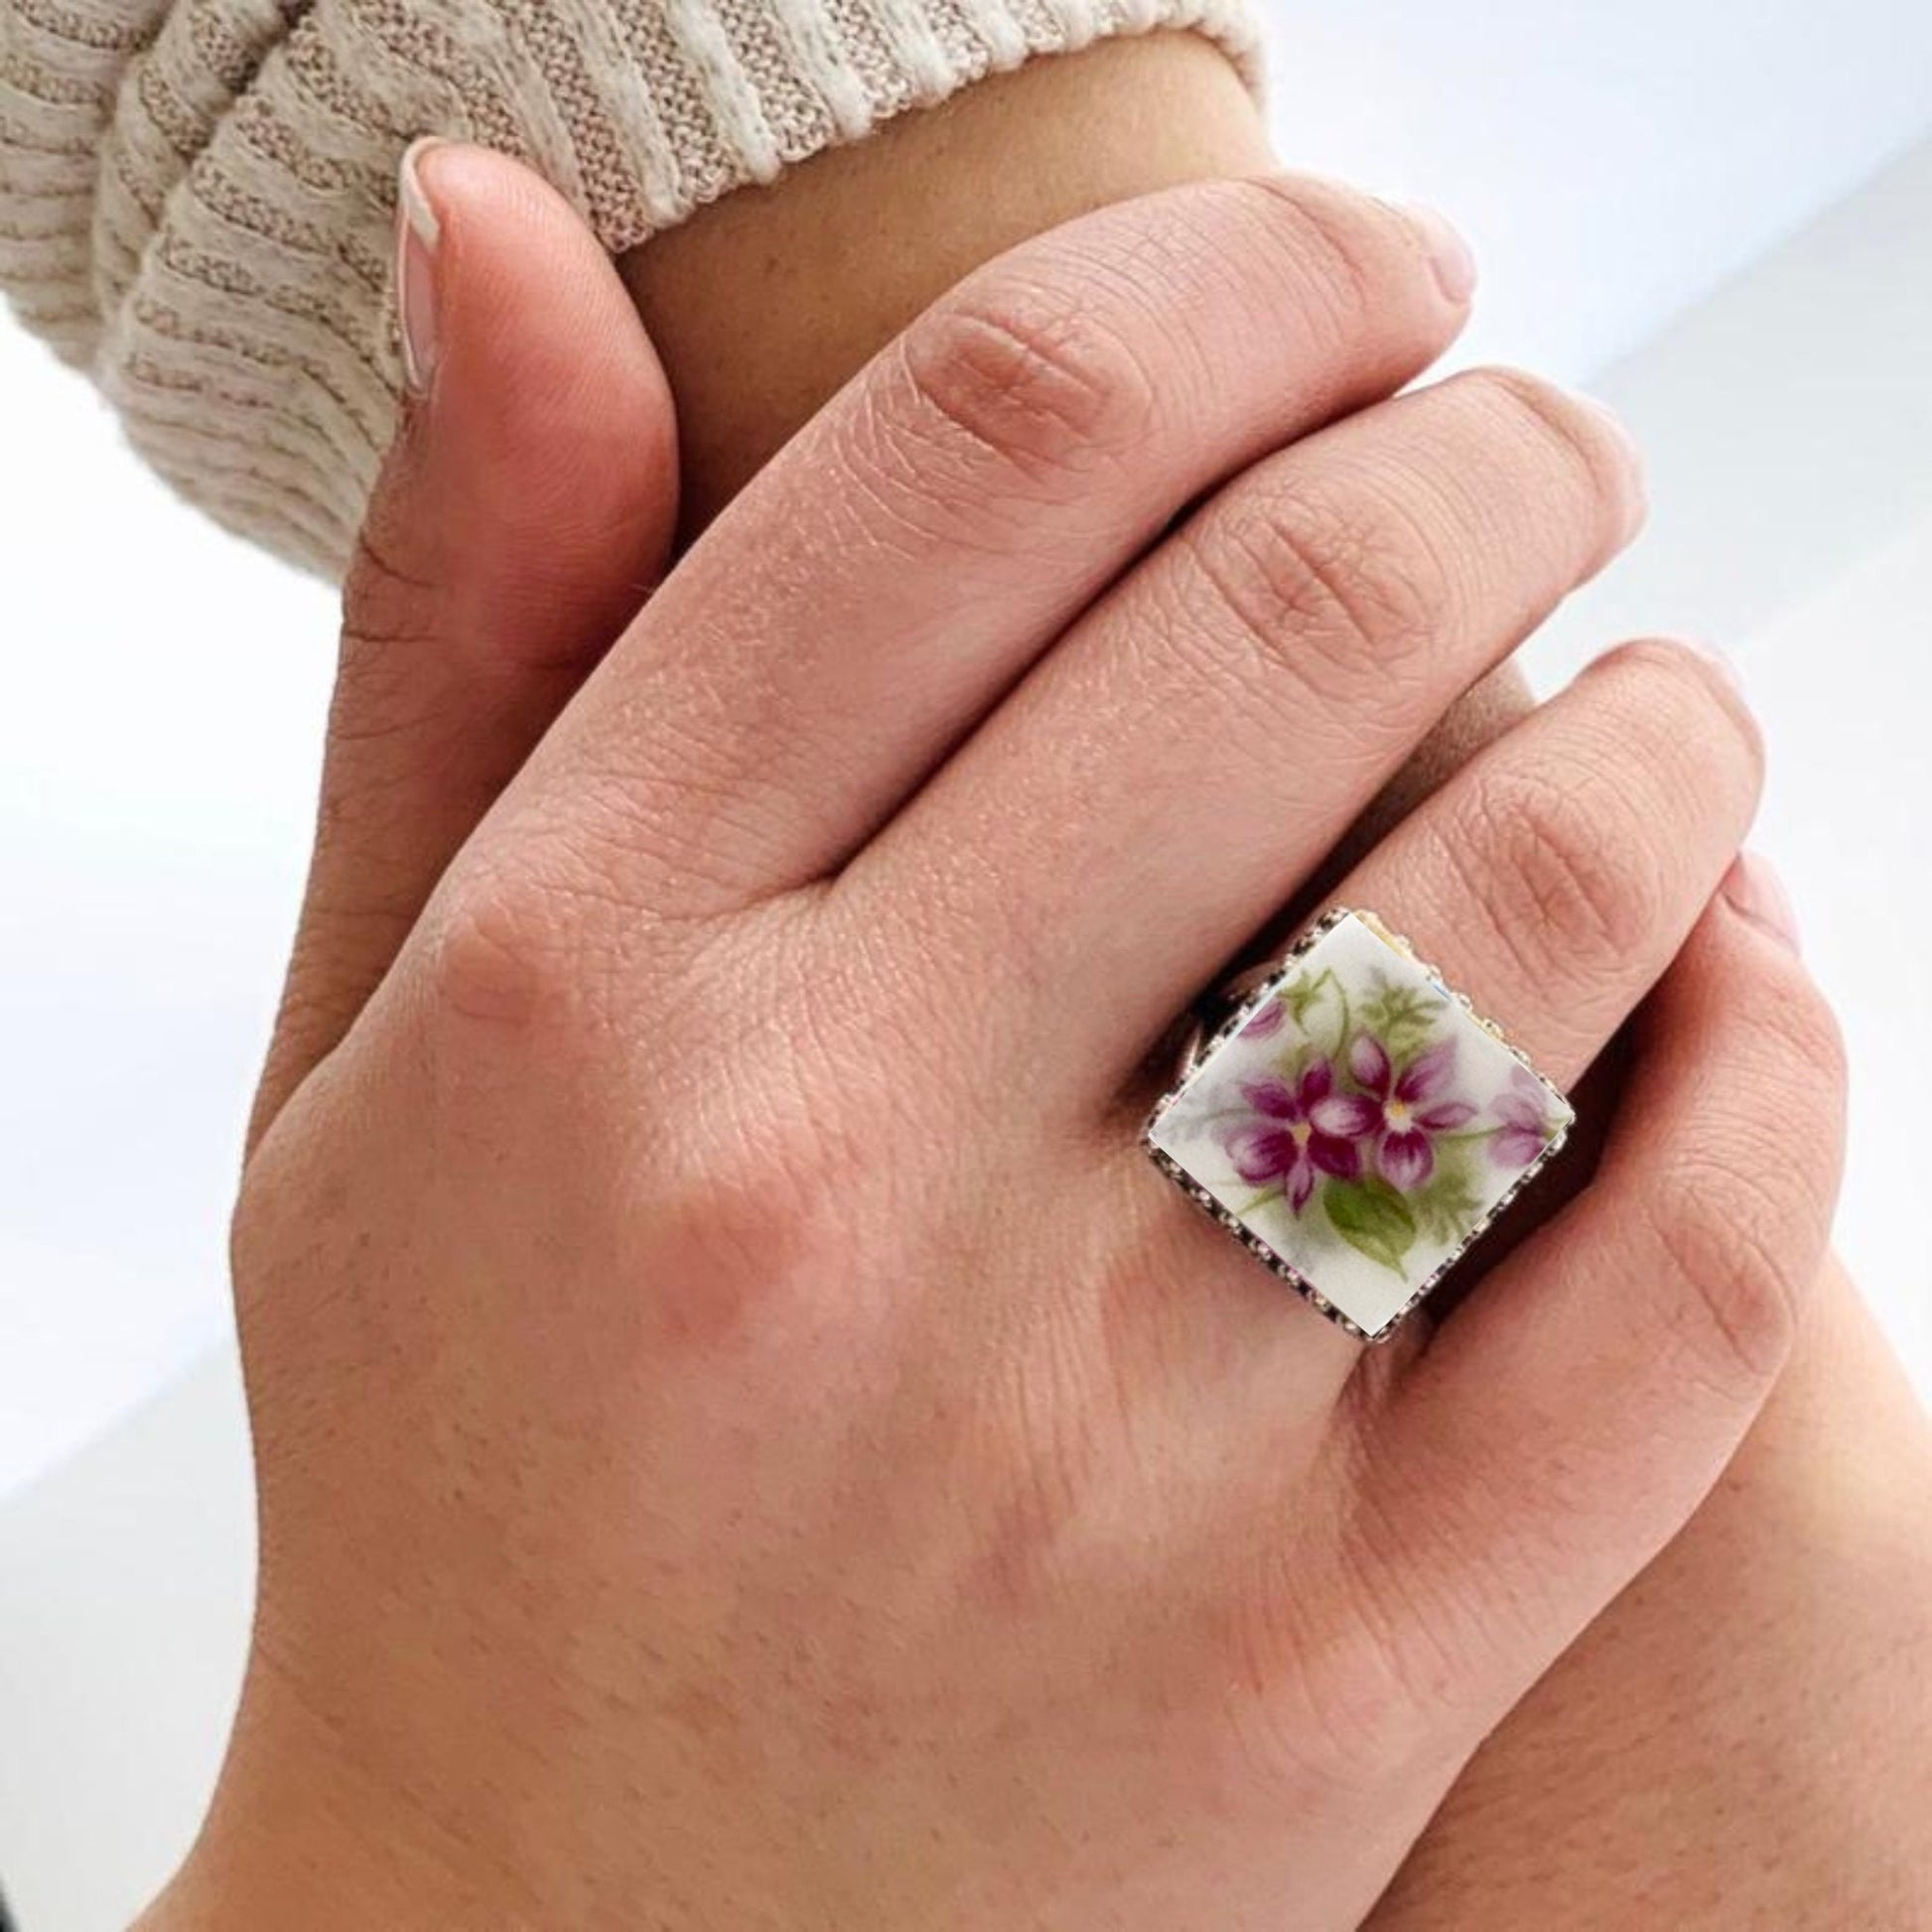 Royal Albert China, Purple Violet Flower Broken China Jewelry Ring, Sterling Silver Adjustable Ring, Square Statement Ring